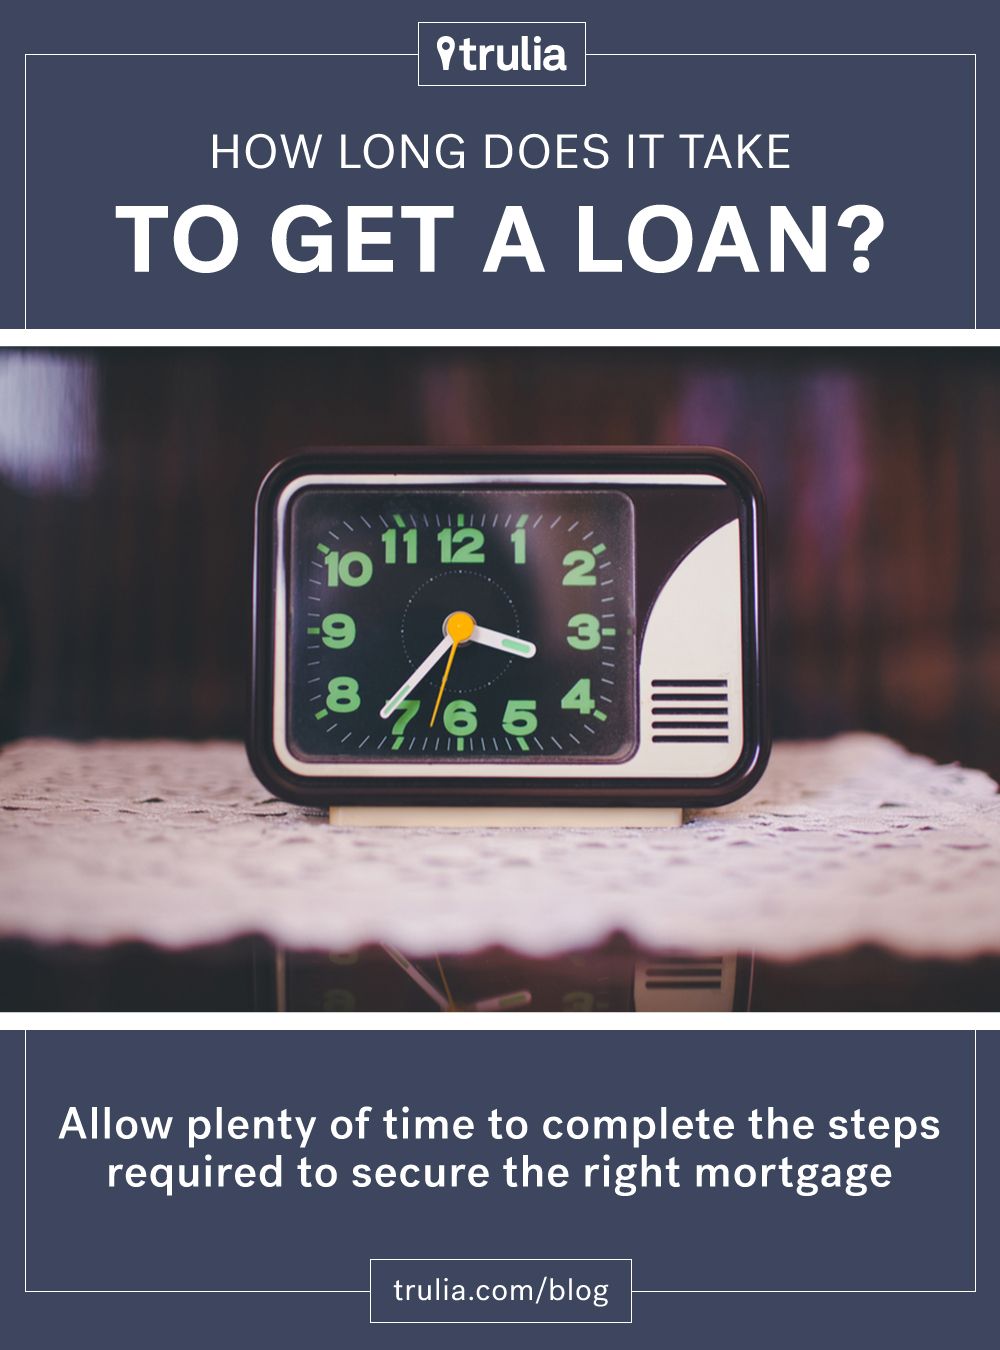 How Long Does It Take to Get a Loan?